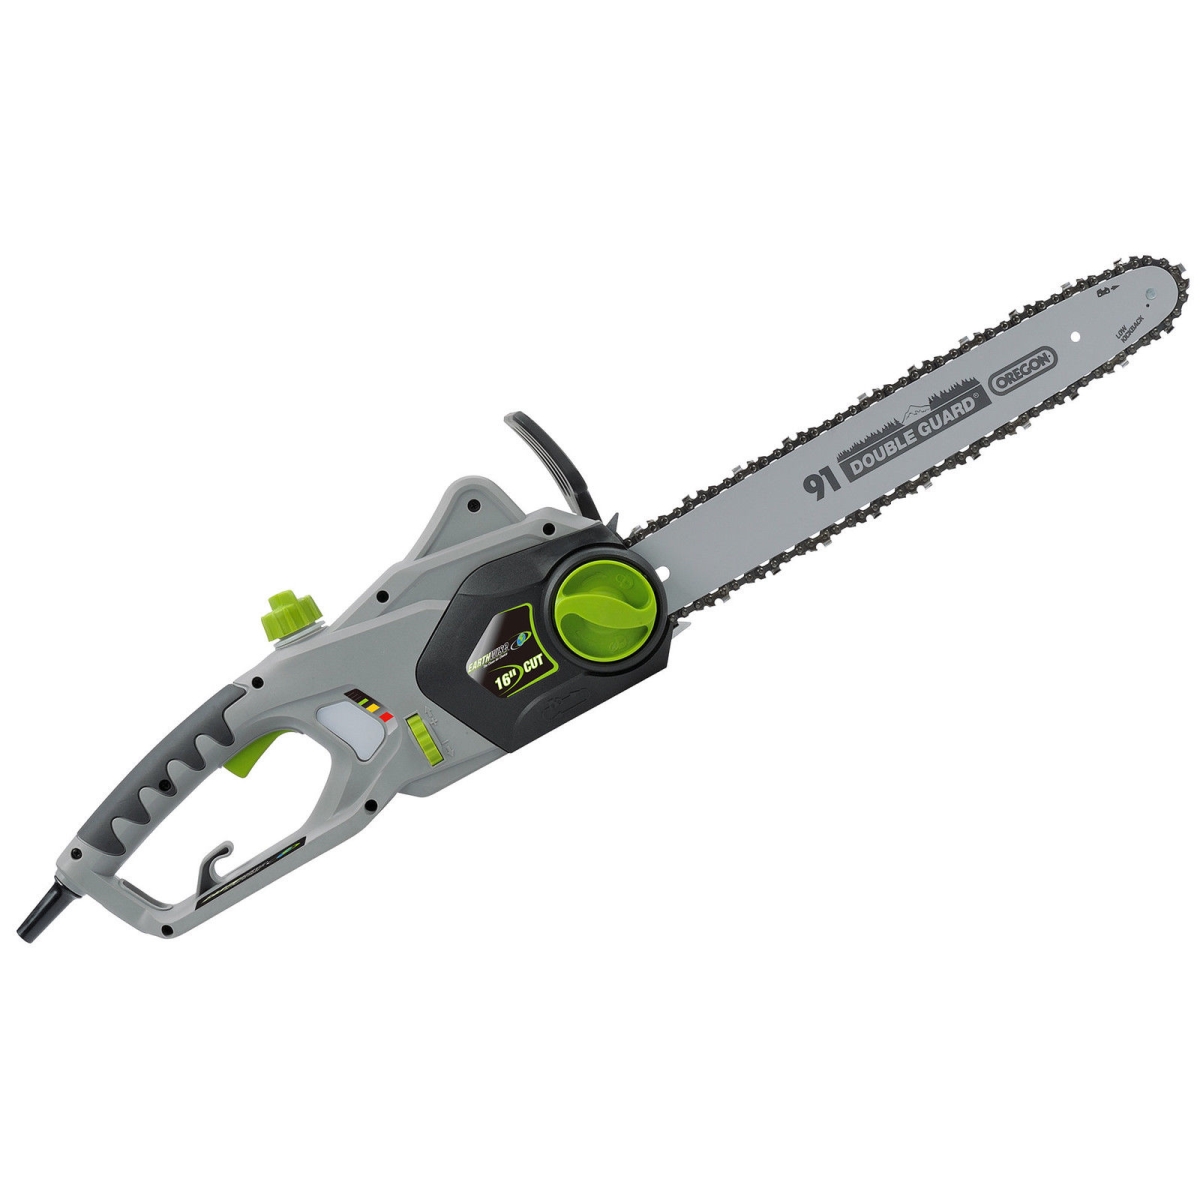 Cs30116 16 In. Electric Corded Chain Saw